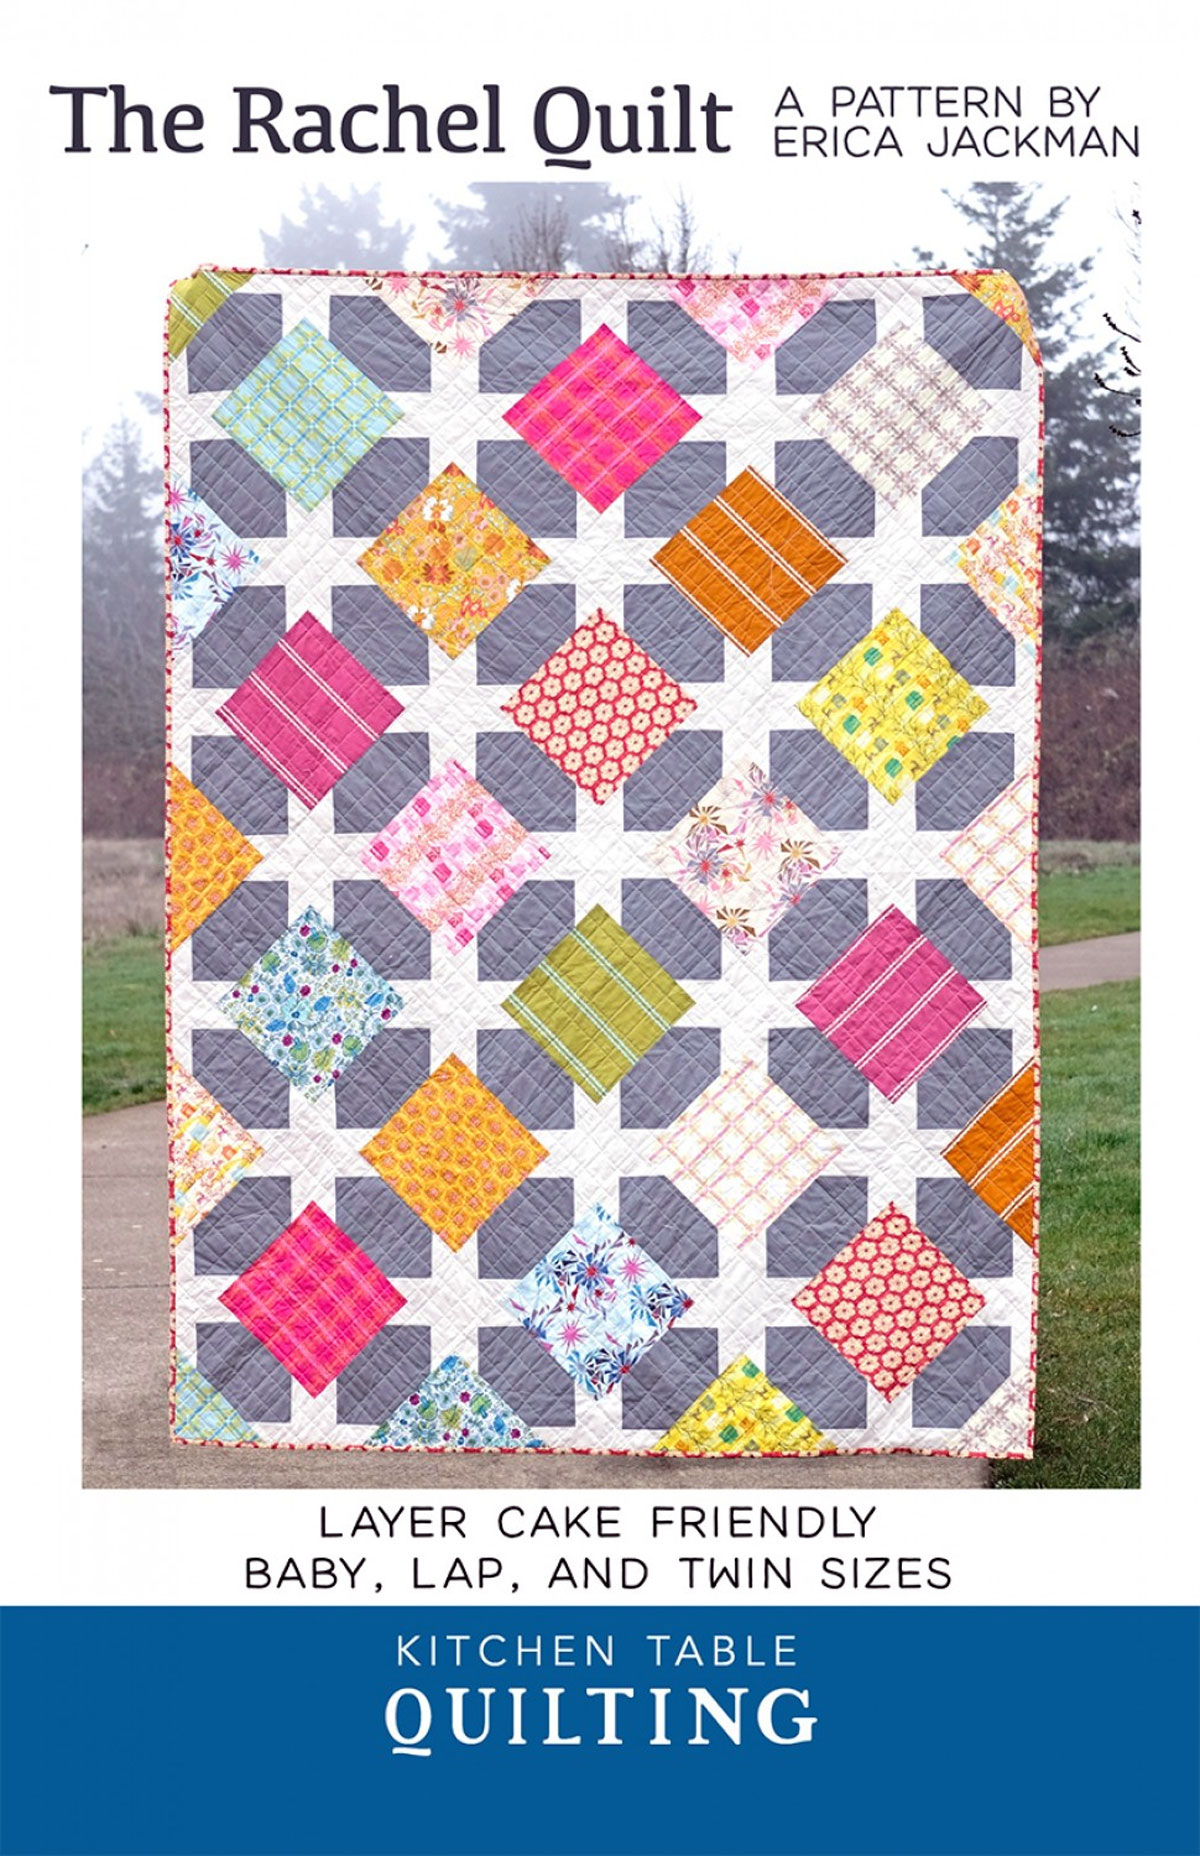 The-Rachel-quilt-sewing-pattern-Kitchen-Table-Quilting-Erica-Jackman-front